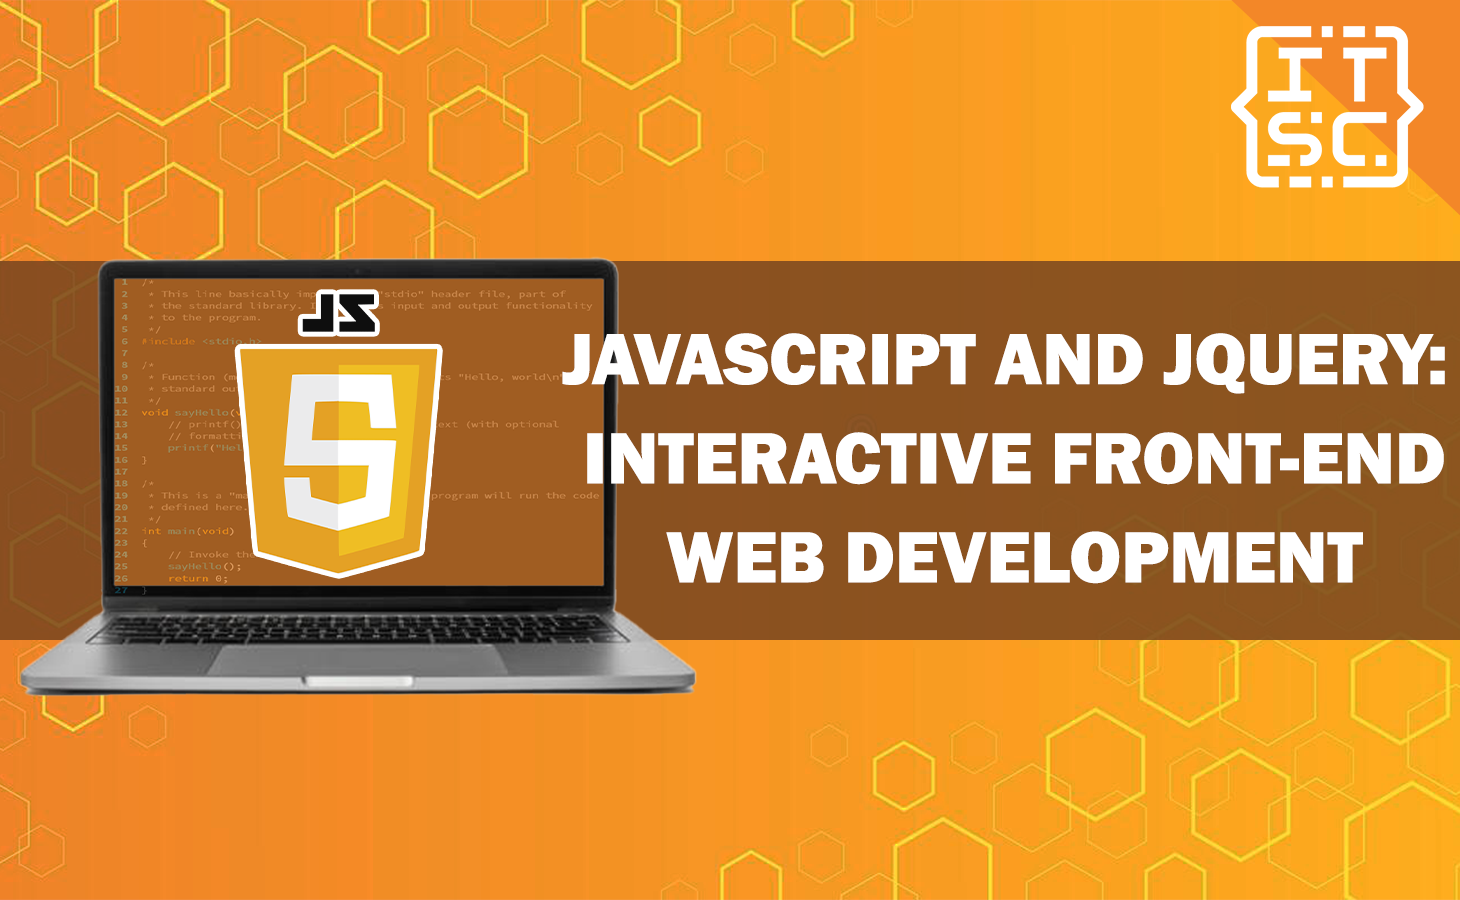 JavaScript and jQuery Interactive Front-End Web Development